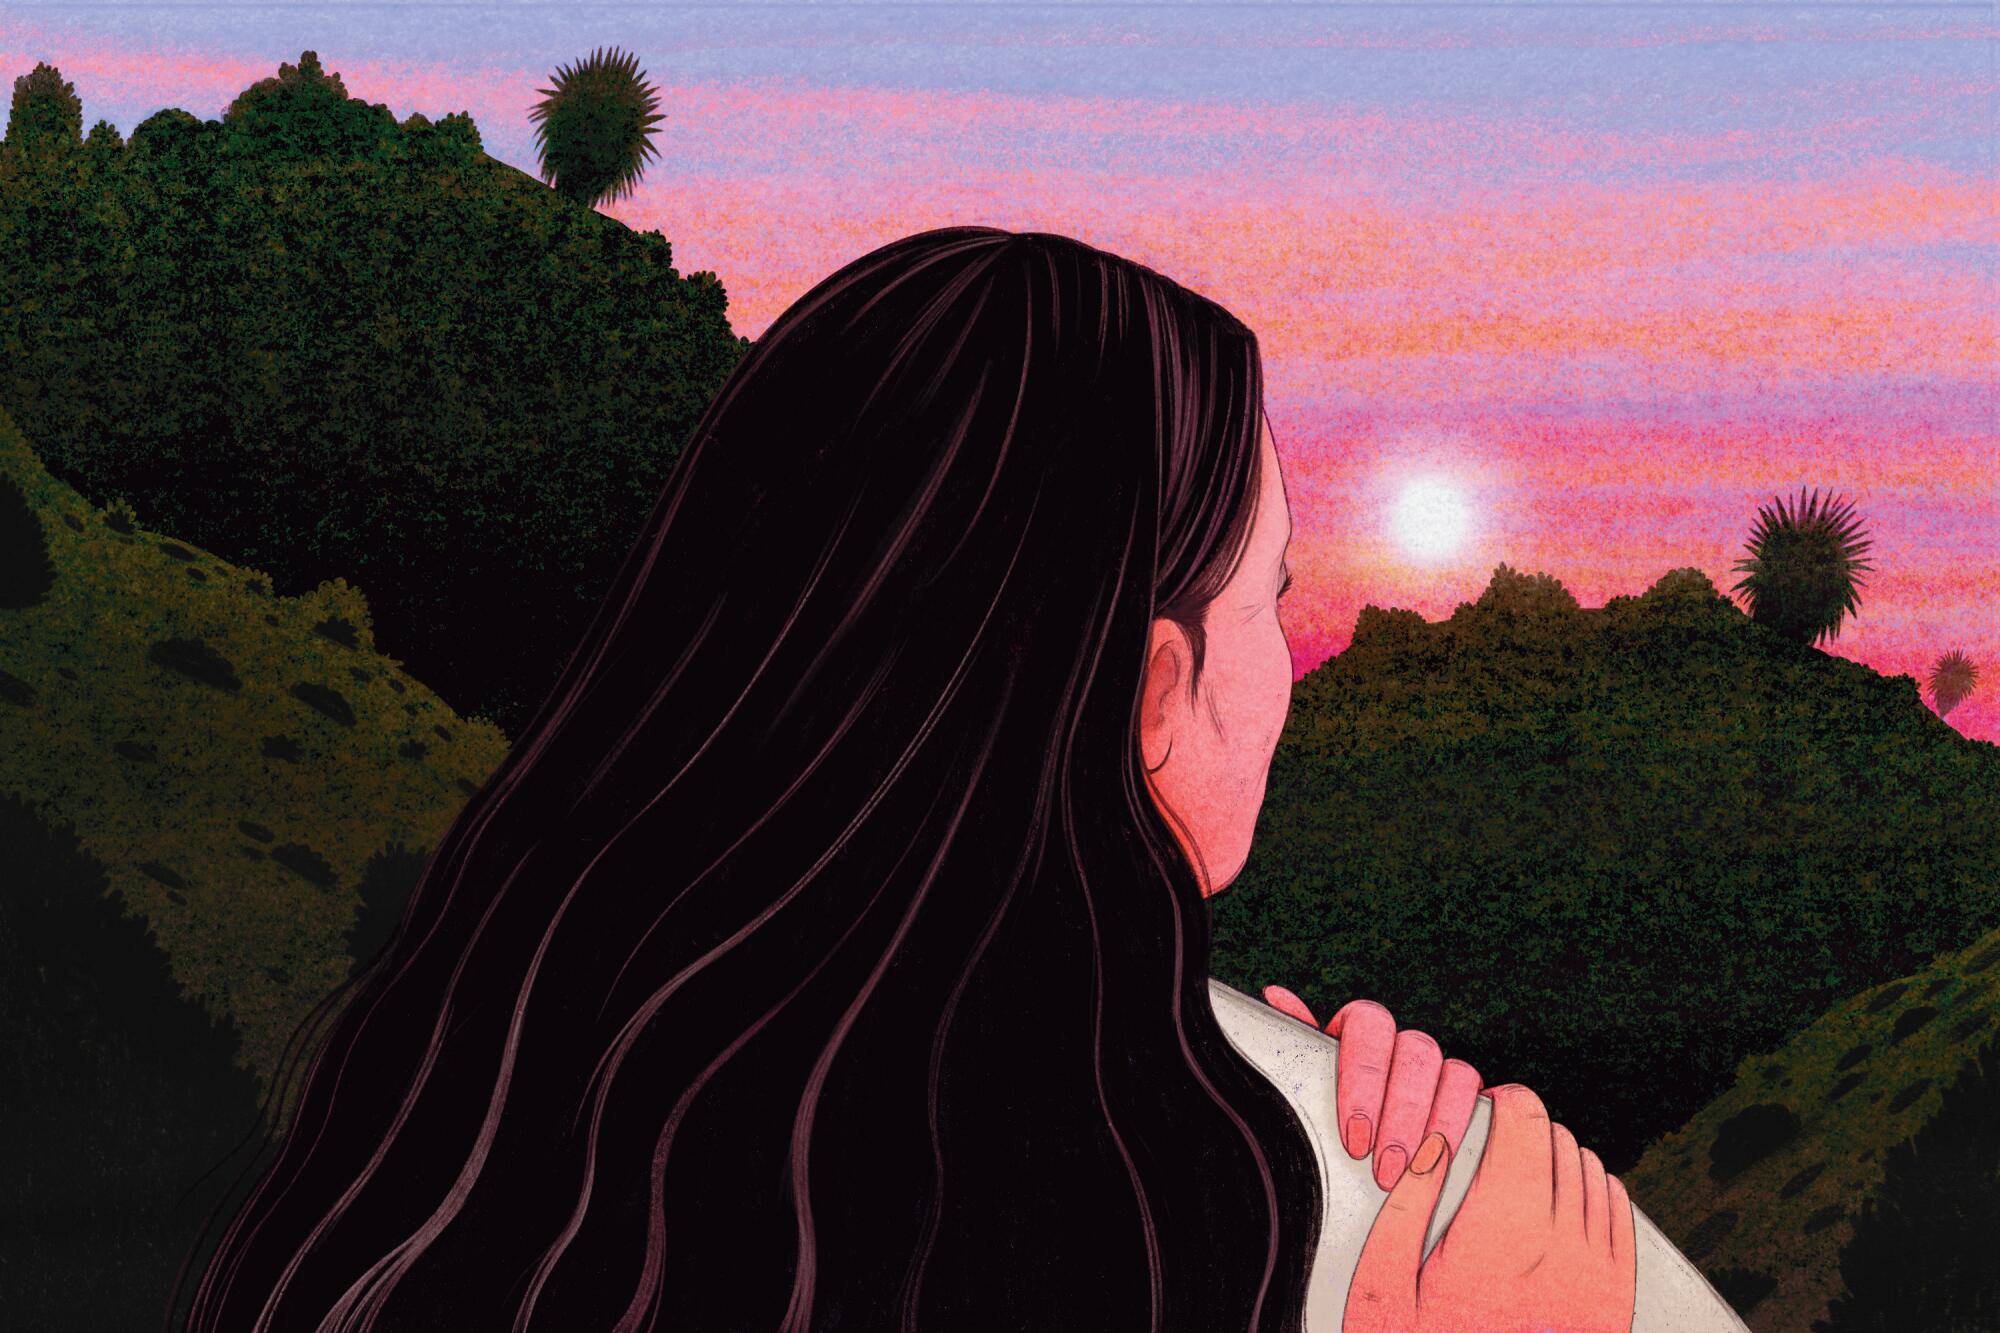 Illustration of a woman looking out at a sunset while a hand reaches from behind to her shoulder.